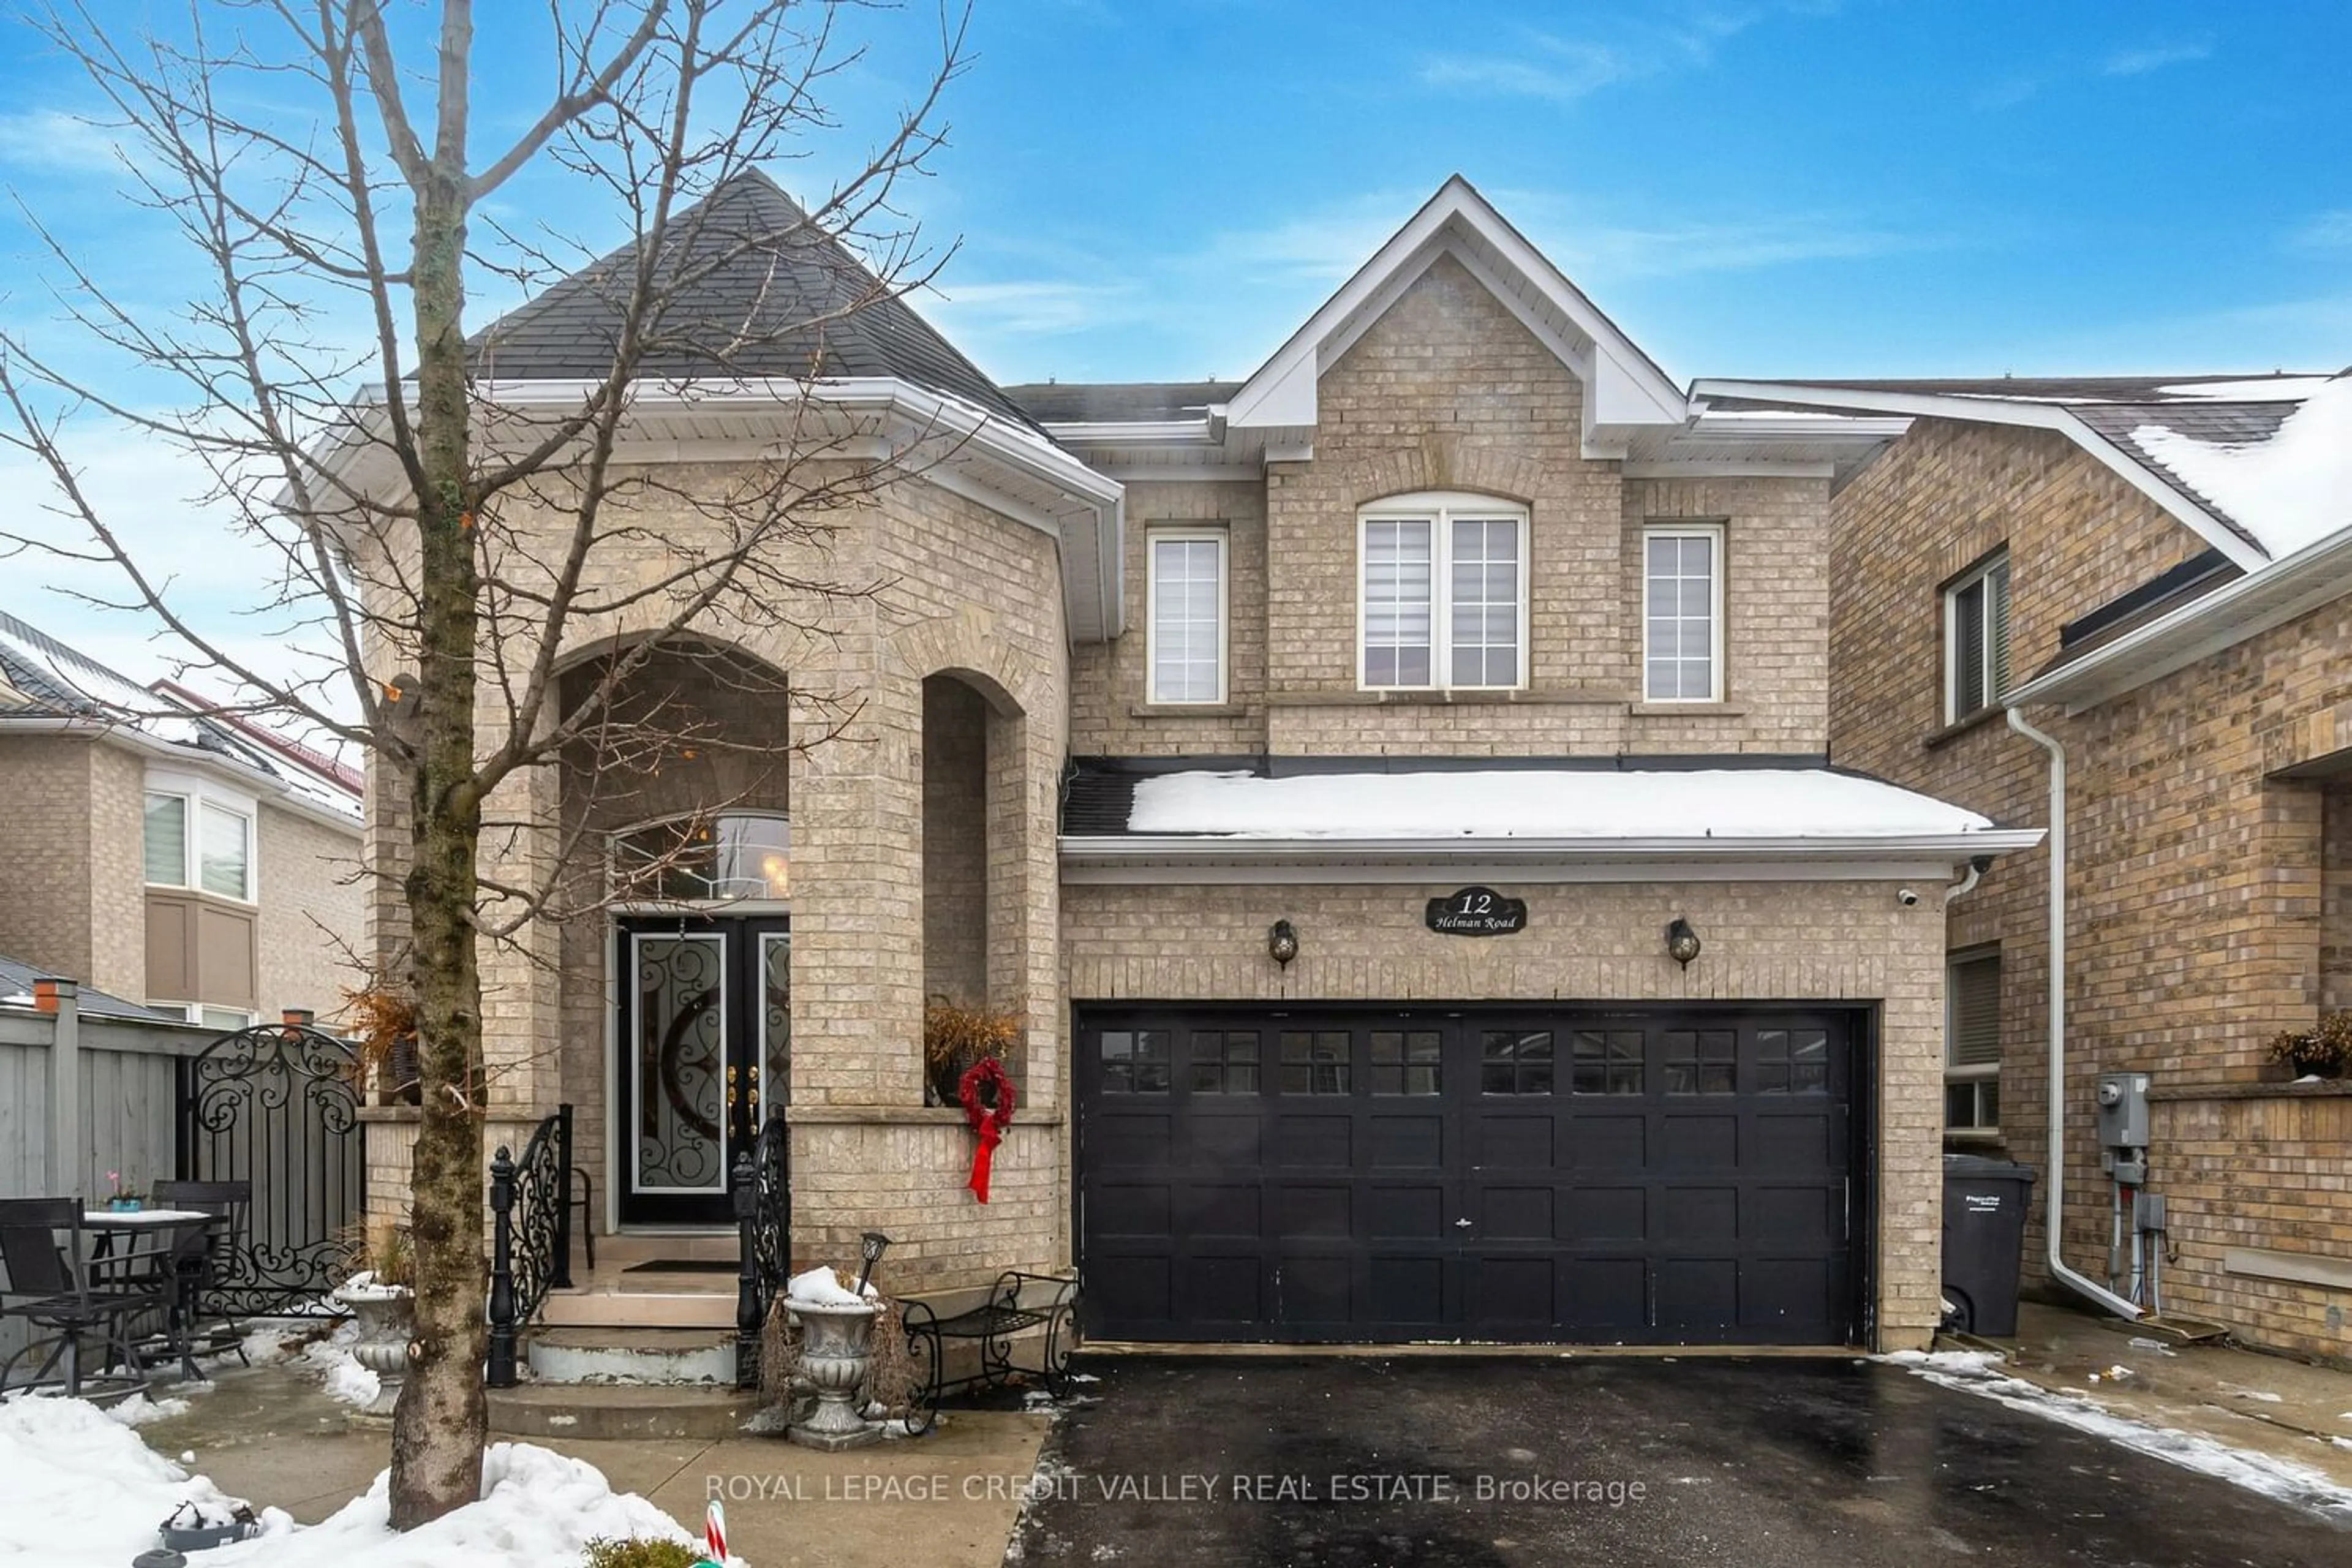 Home with brick exterior material for 12 Helman Rd, Brampton Ontario L6R 0R6